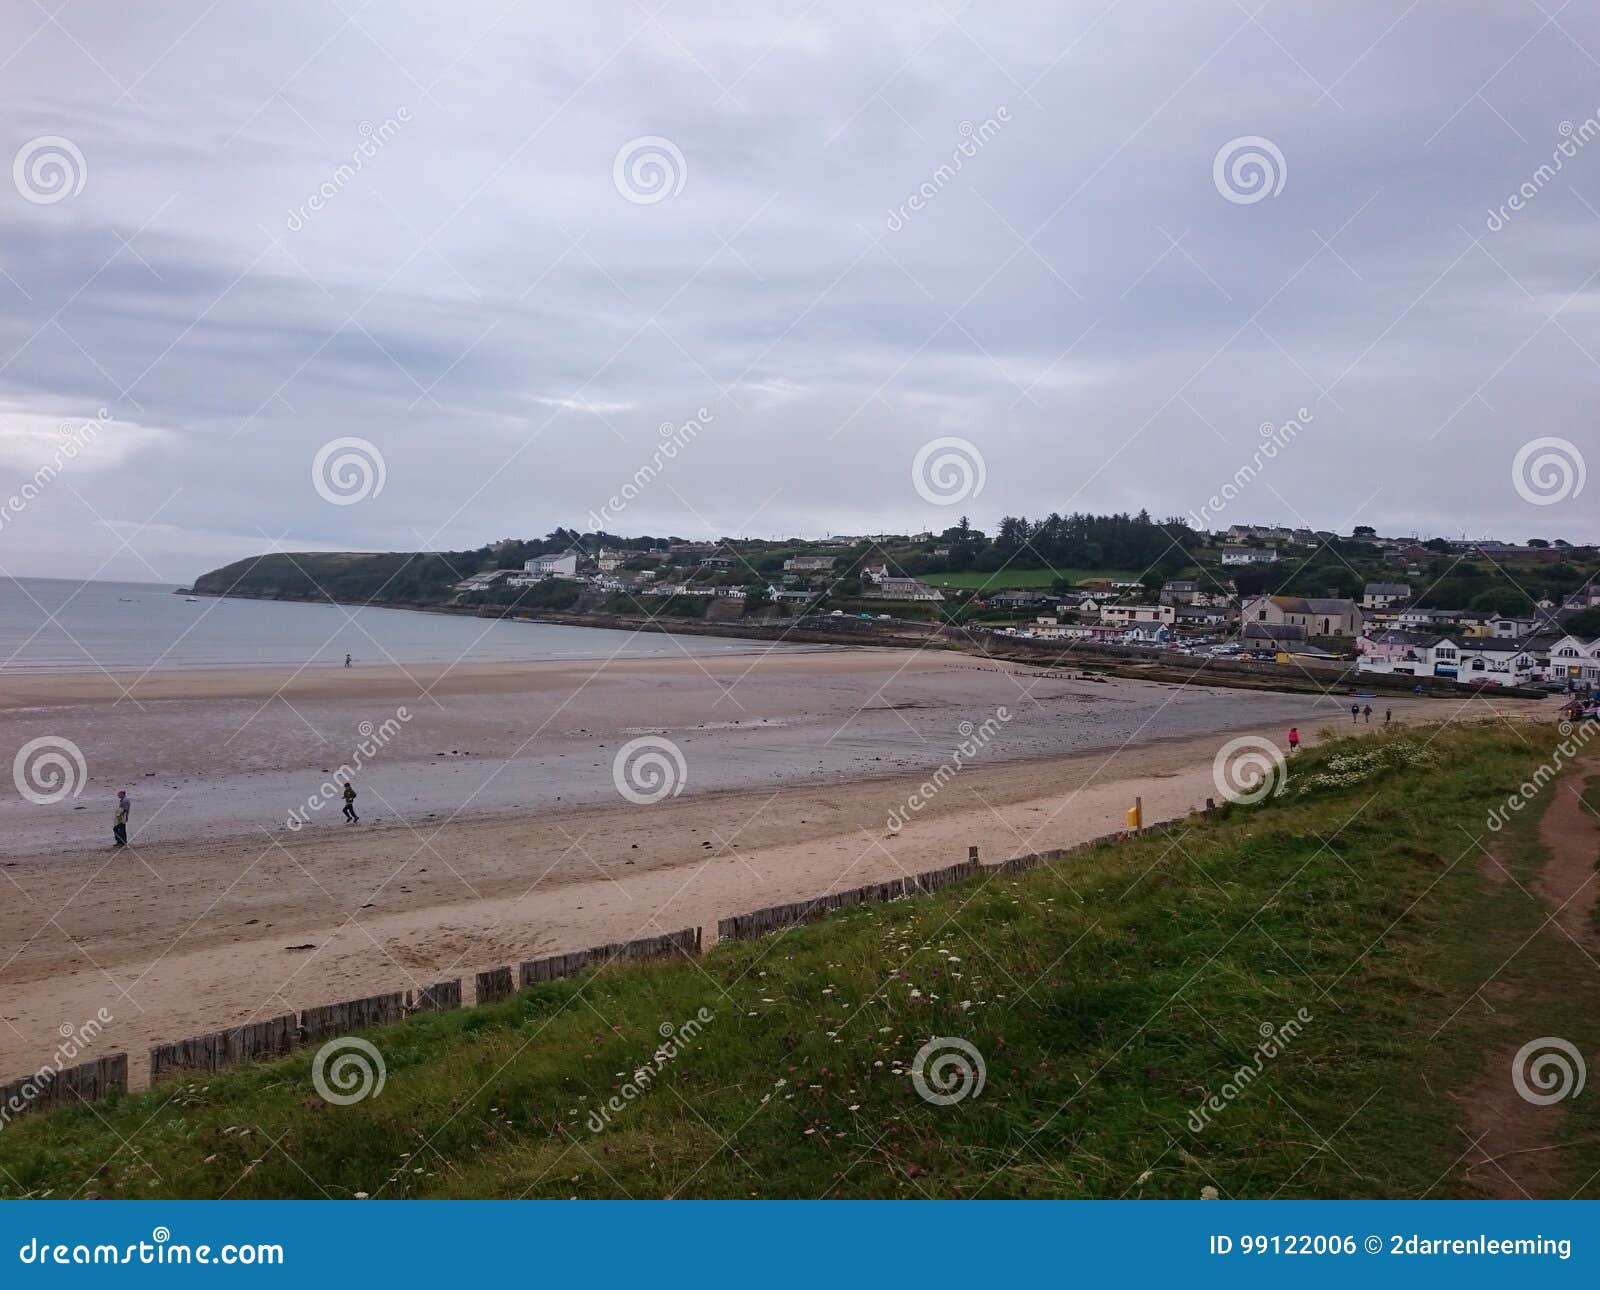 Ardmore Beach County Waterford Ireland Stock Photo Image Of Ardmore Beach